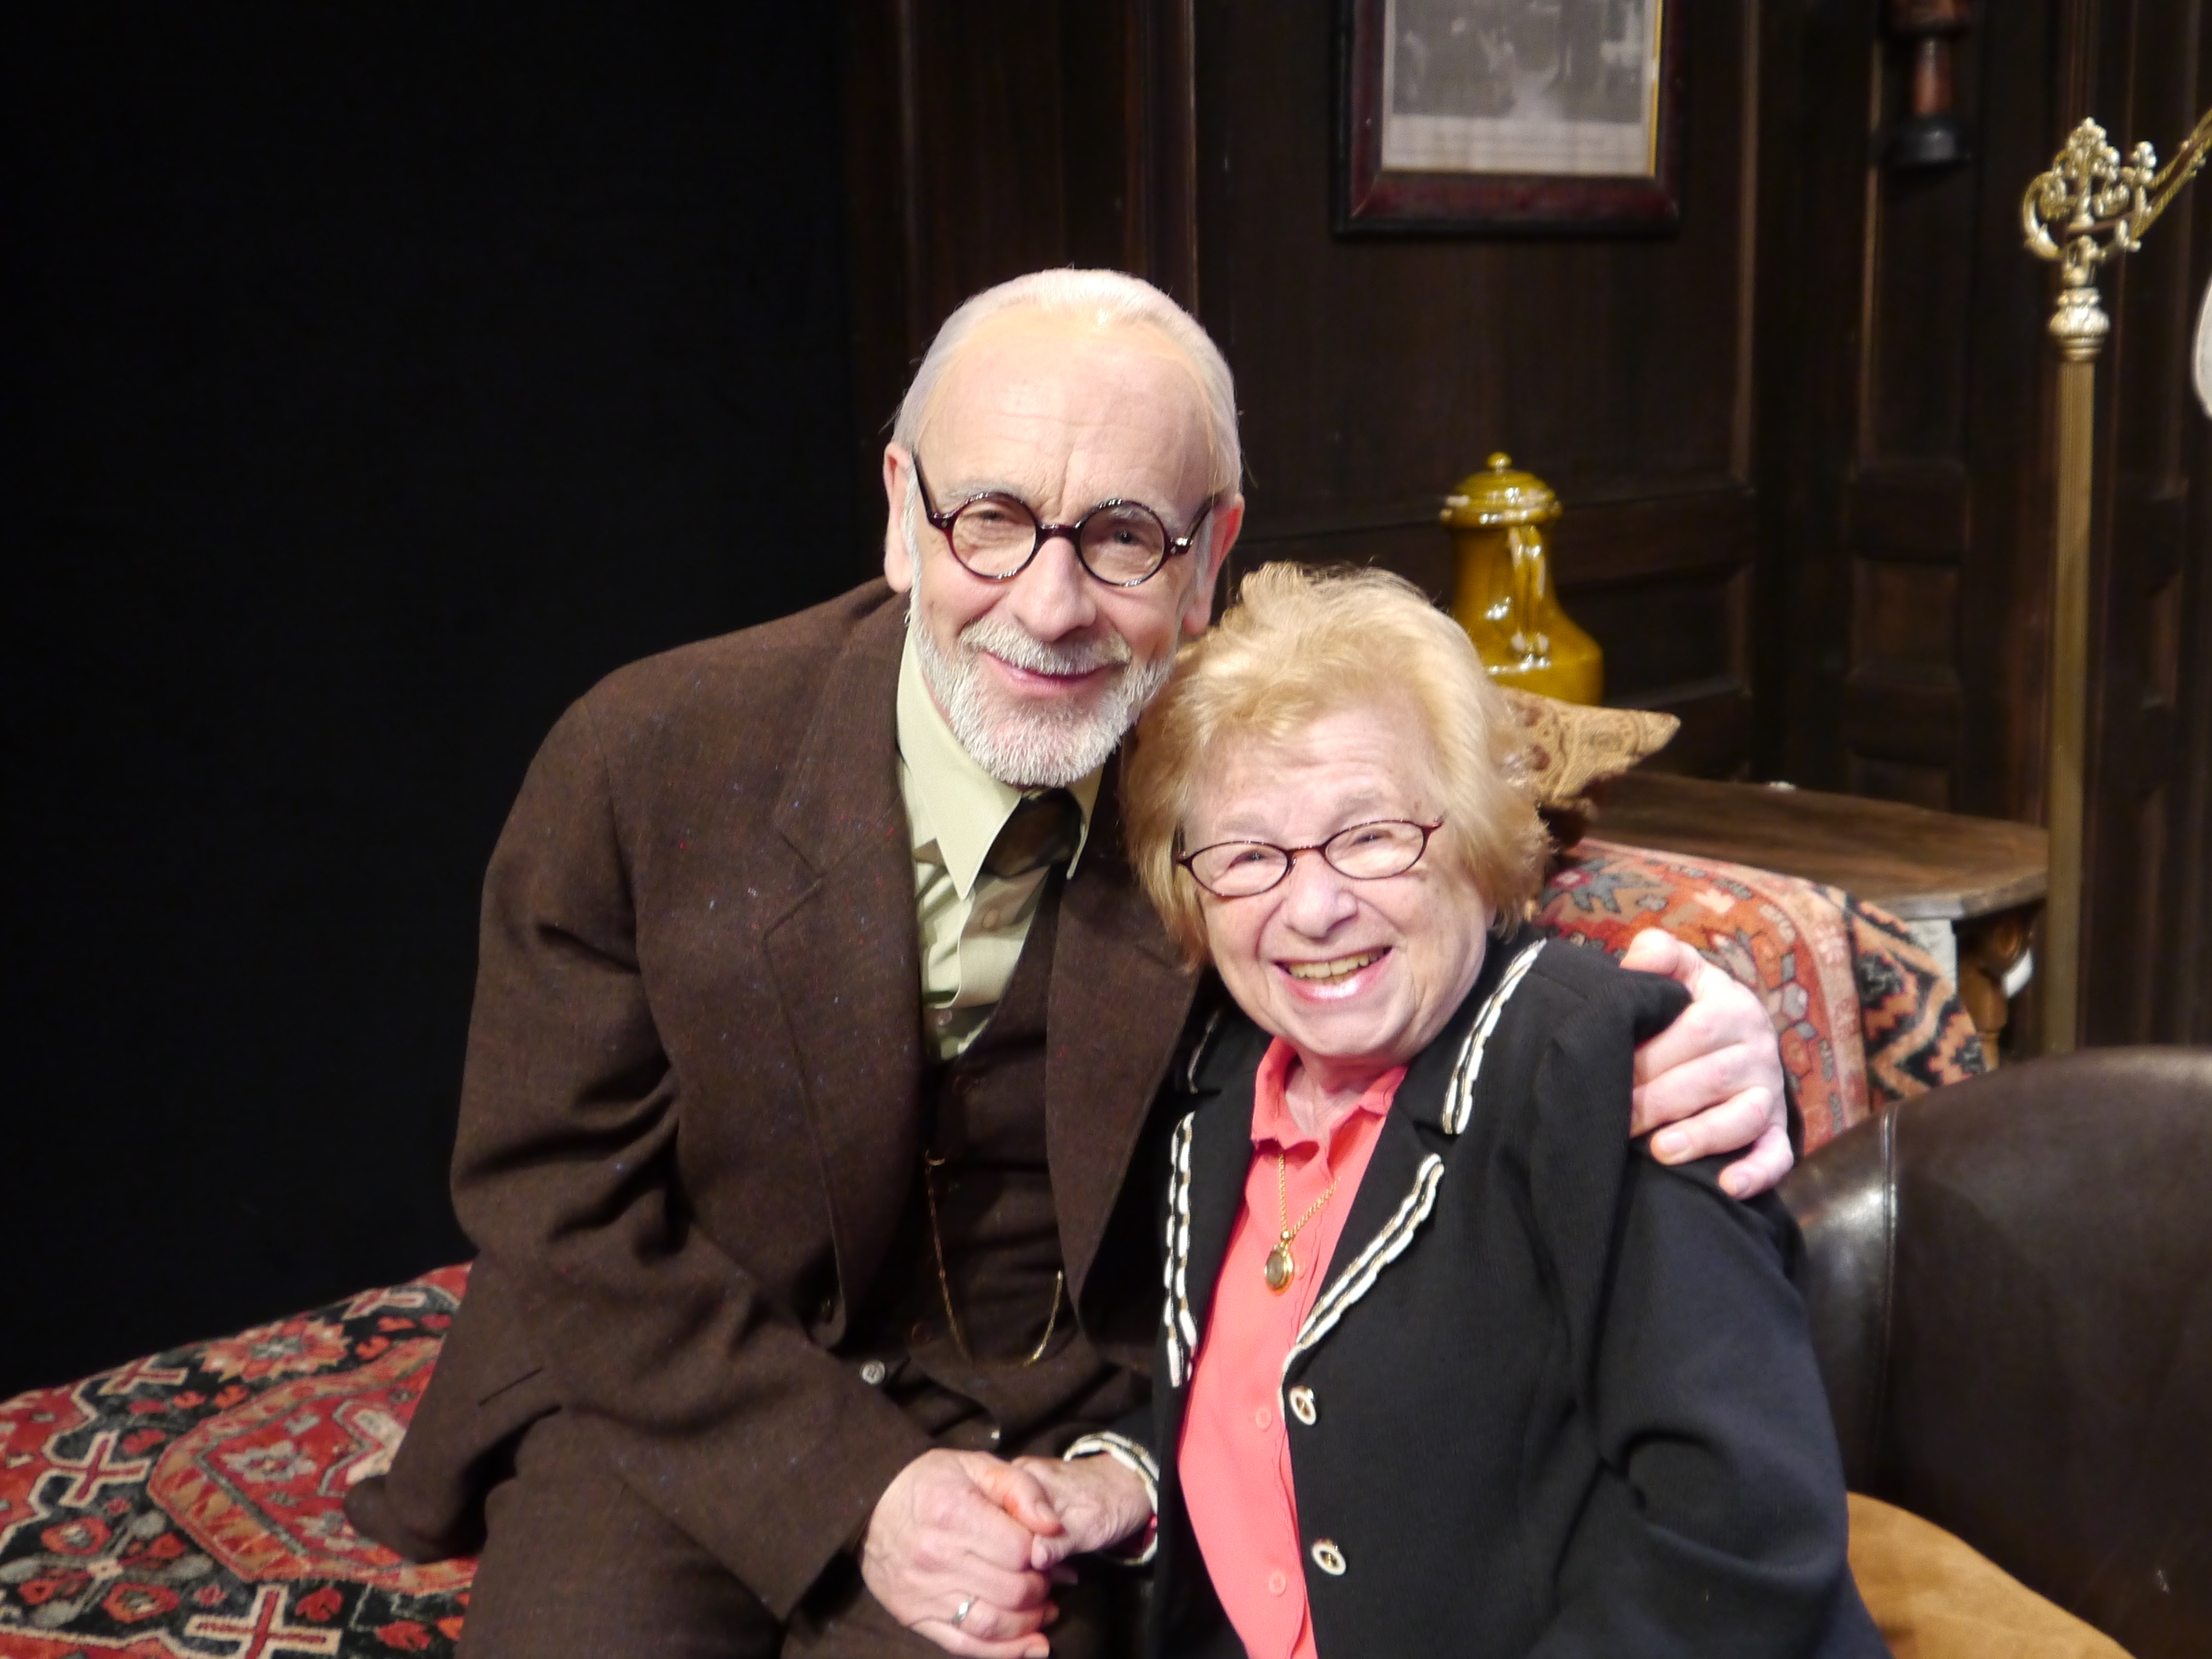 With Dr Ruth: Freud, 'Freud's Last Session'.